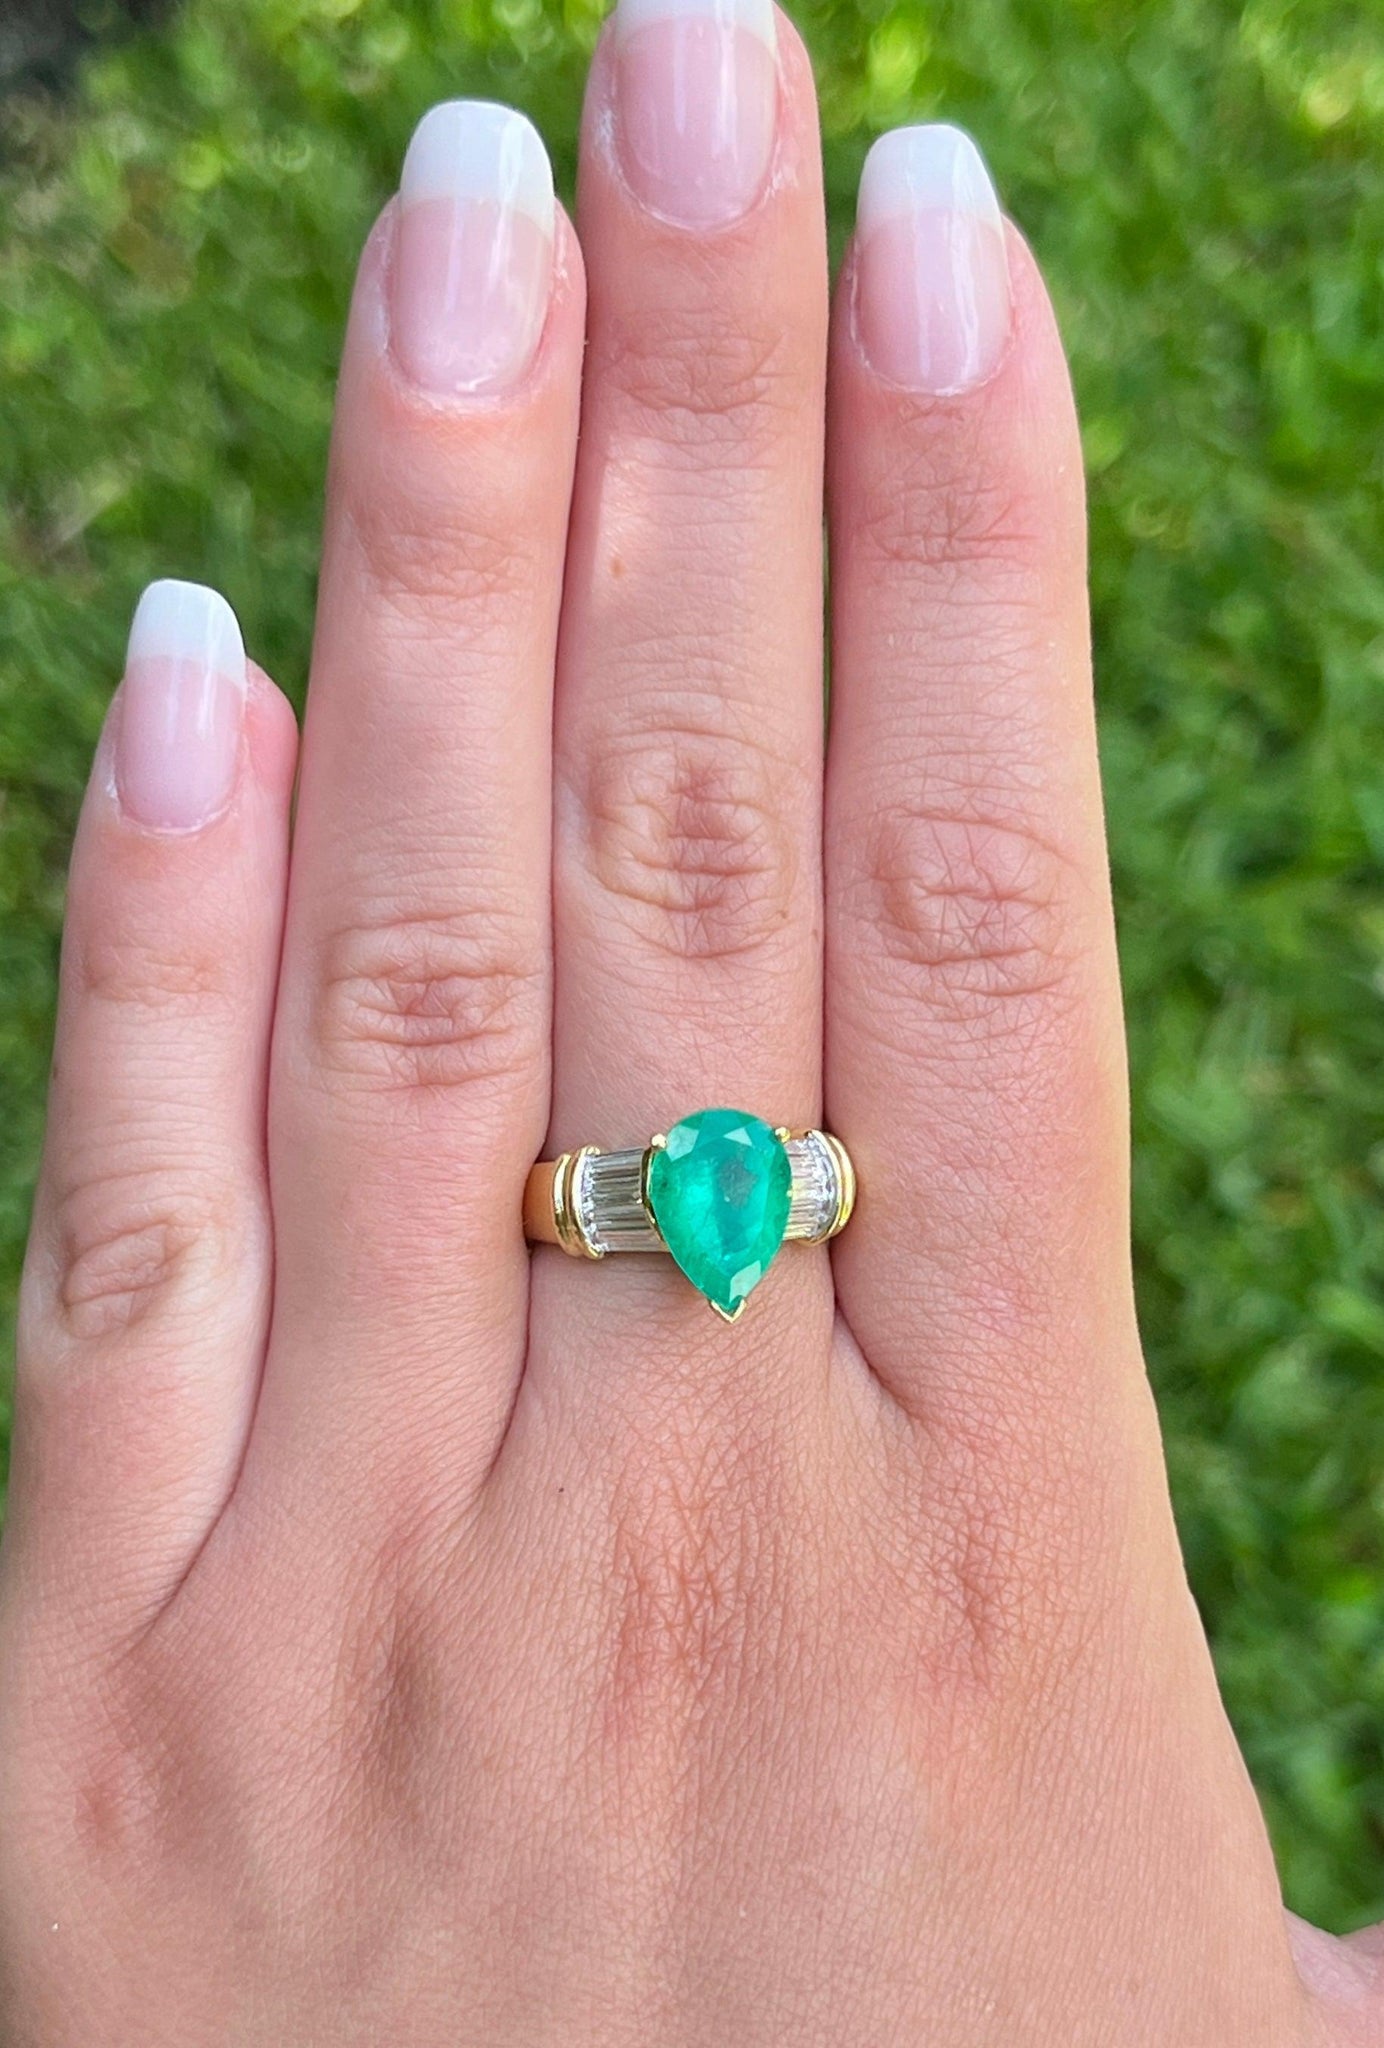 Natural 3.22 Carat Pear Cut Colombian Emerald With Baguette Diamond Side Stone Ring